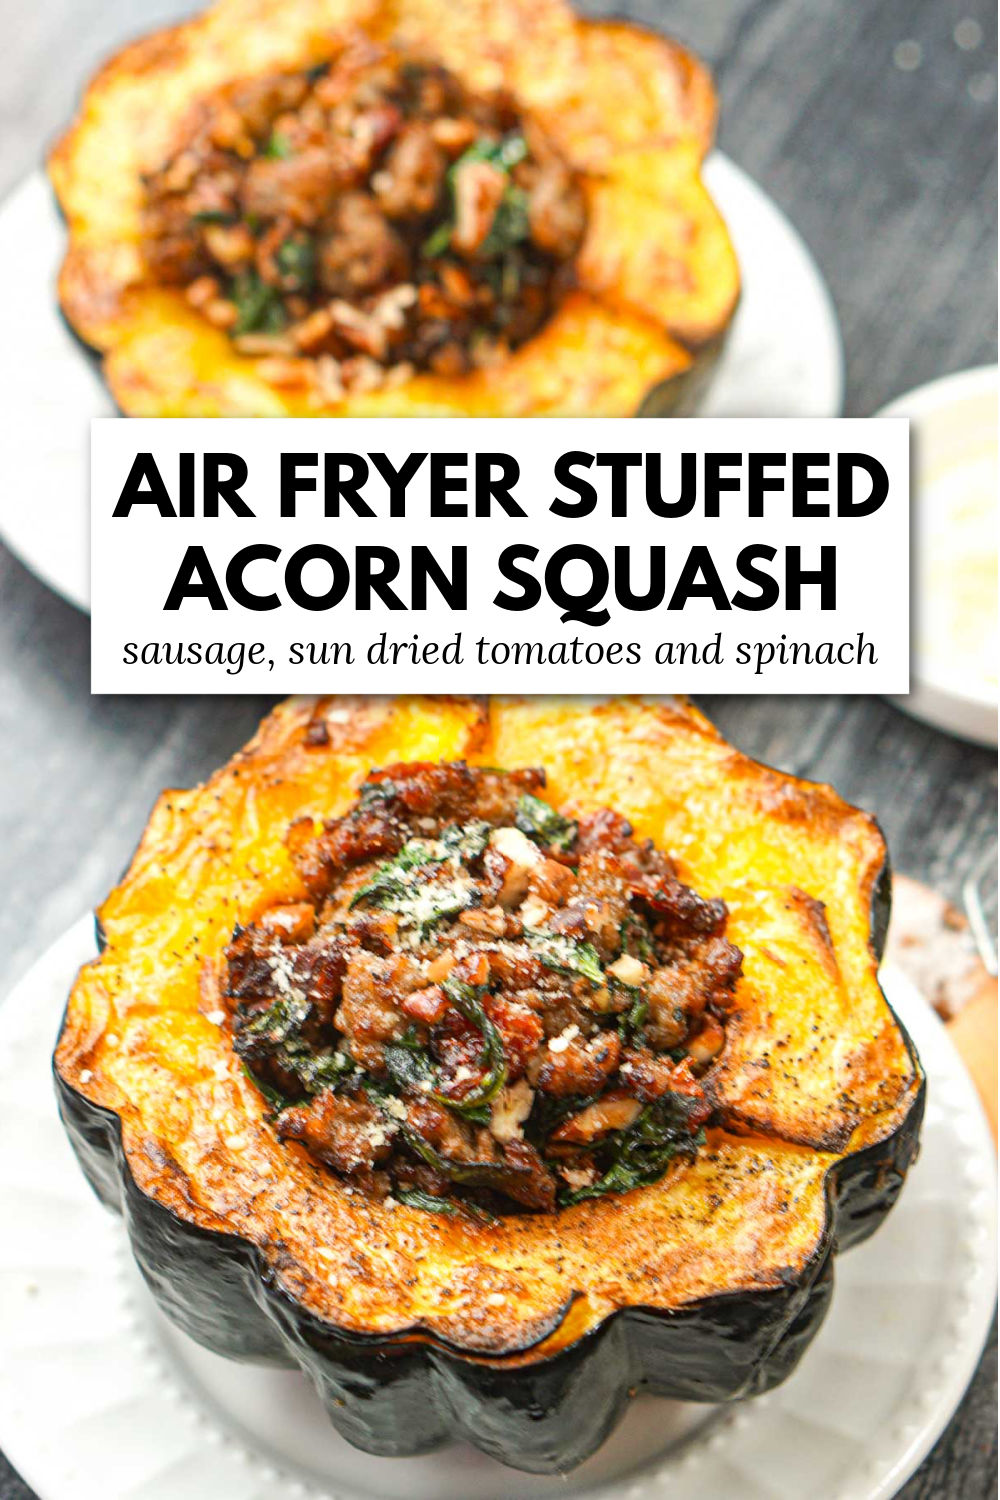 2 halves of air fryer acorn squash stuffed with sausage and sun-dried tomatoes with text